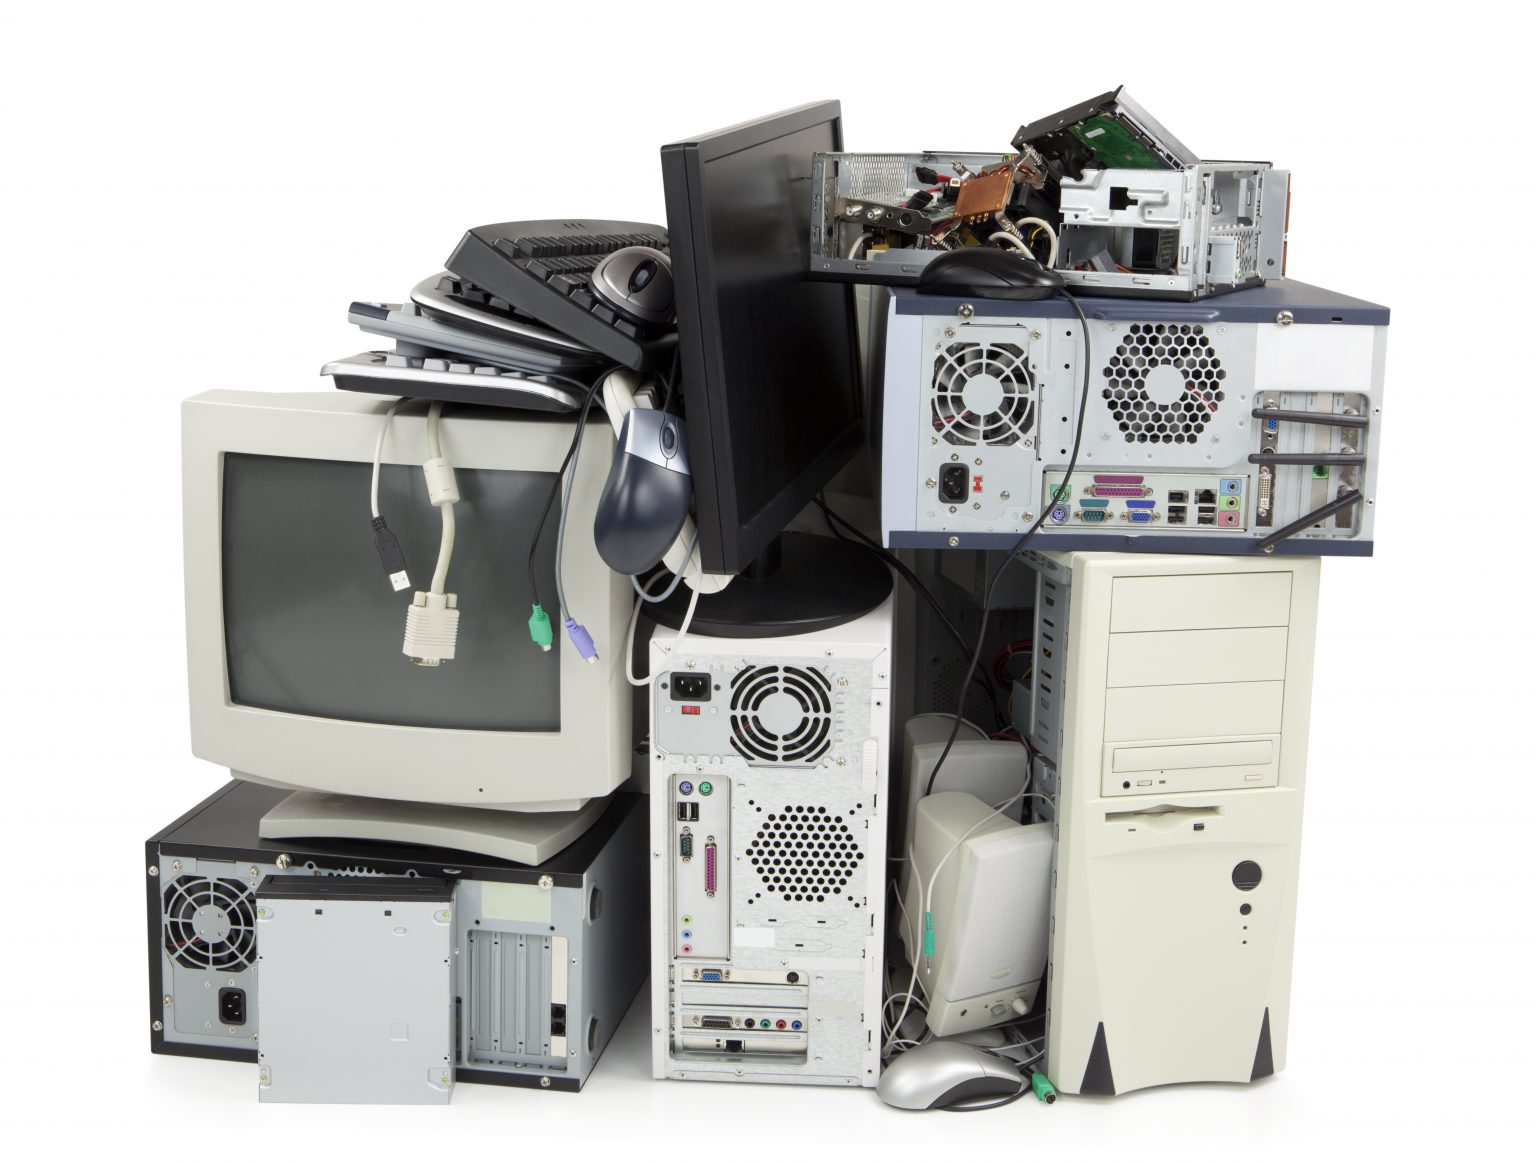 Take Safety Home: Household Electronics Disposal